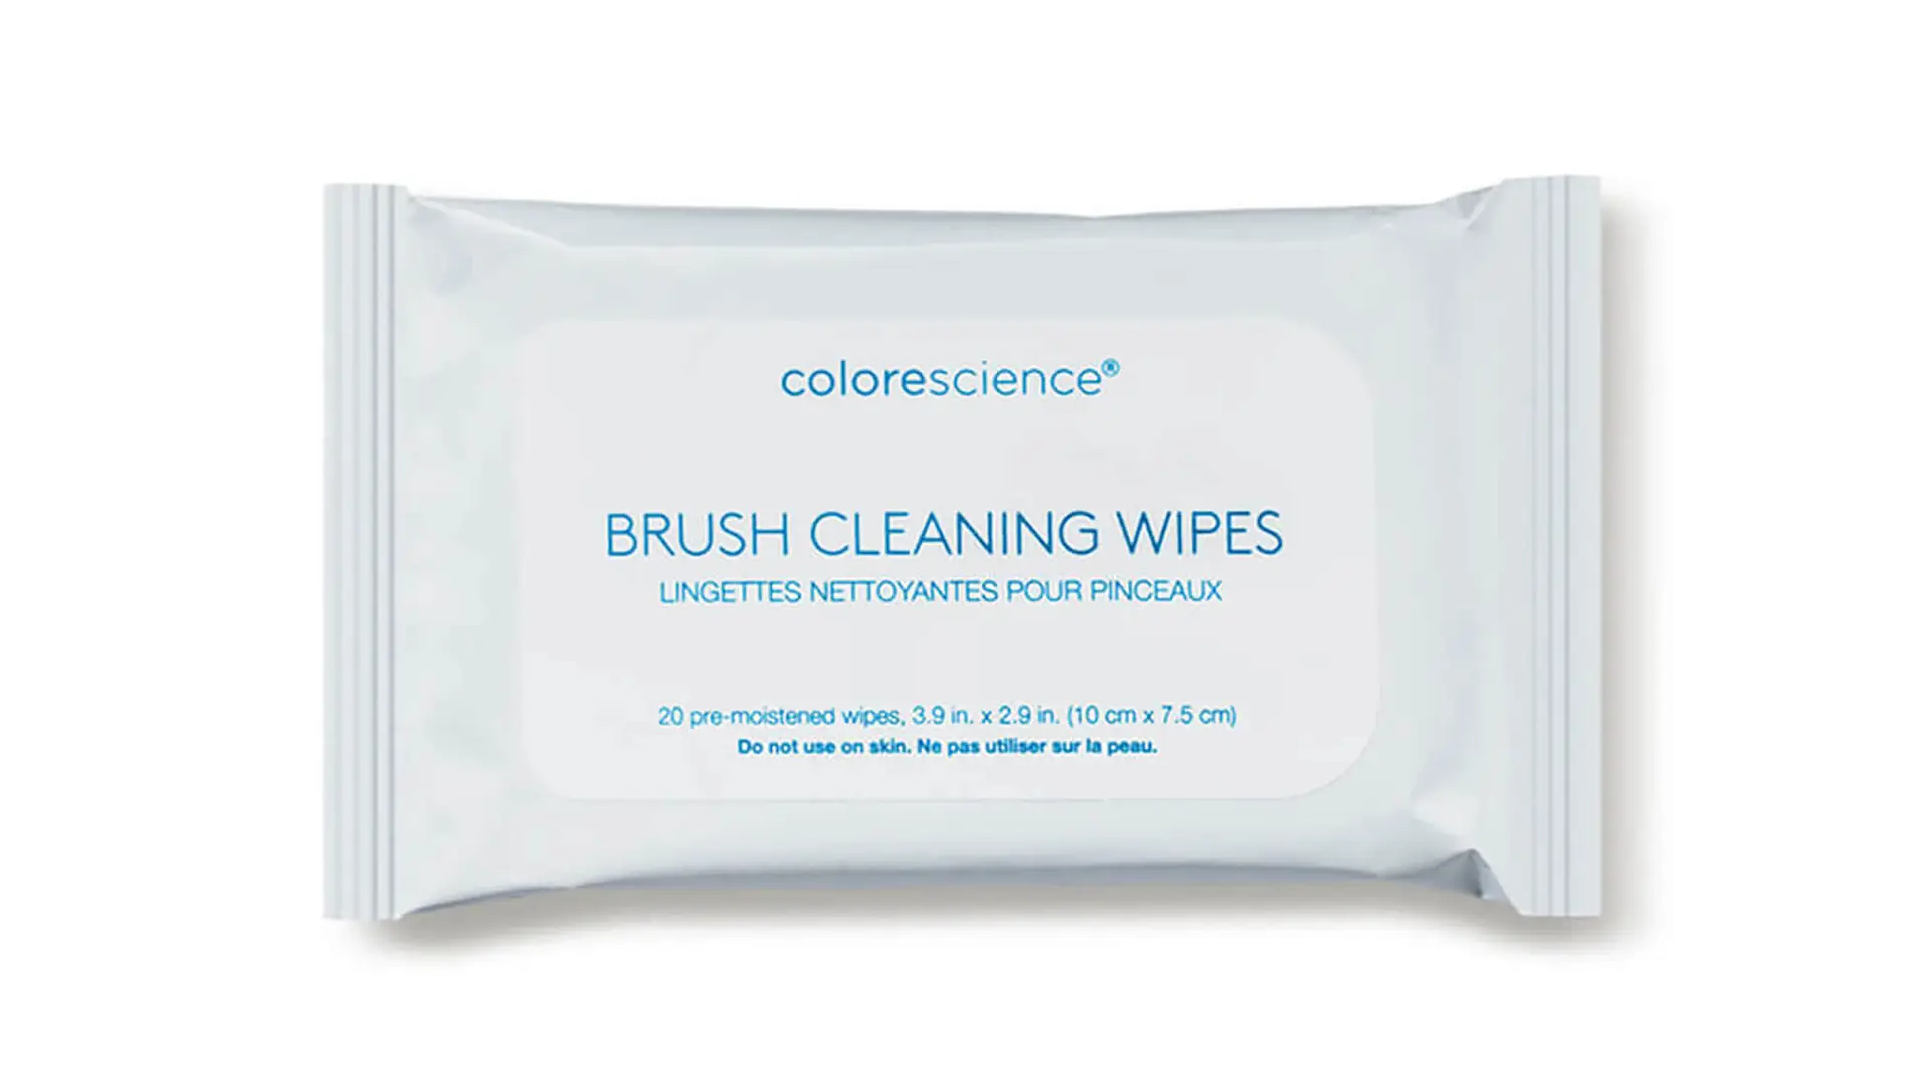 colorescience makeup brush cleaning wipes